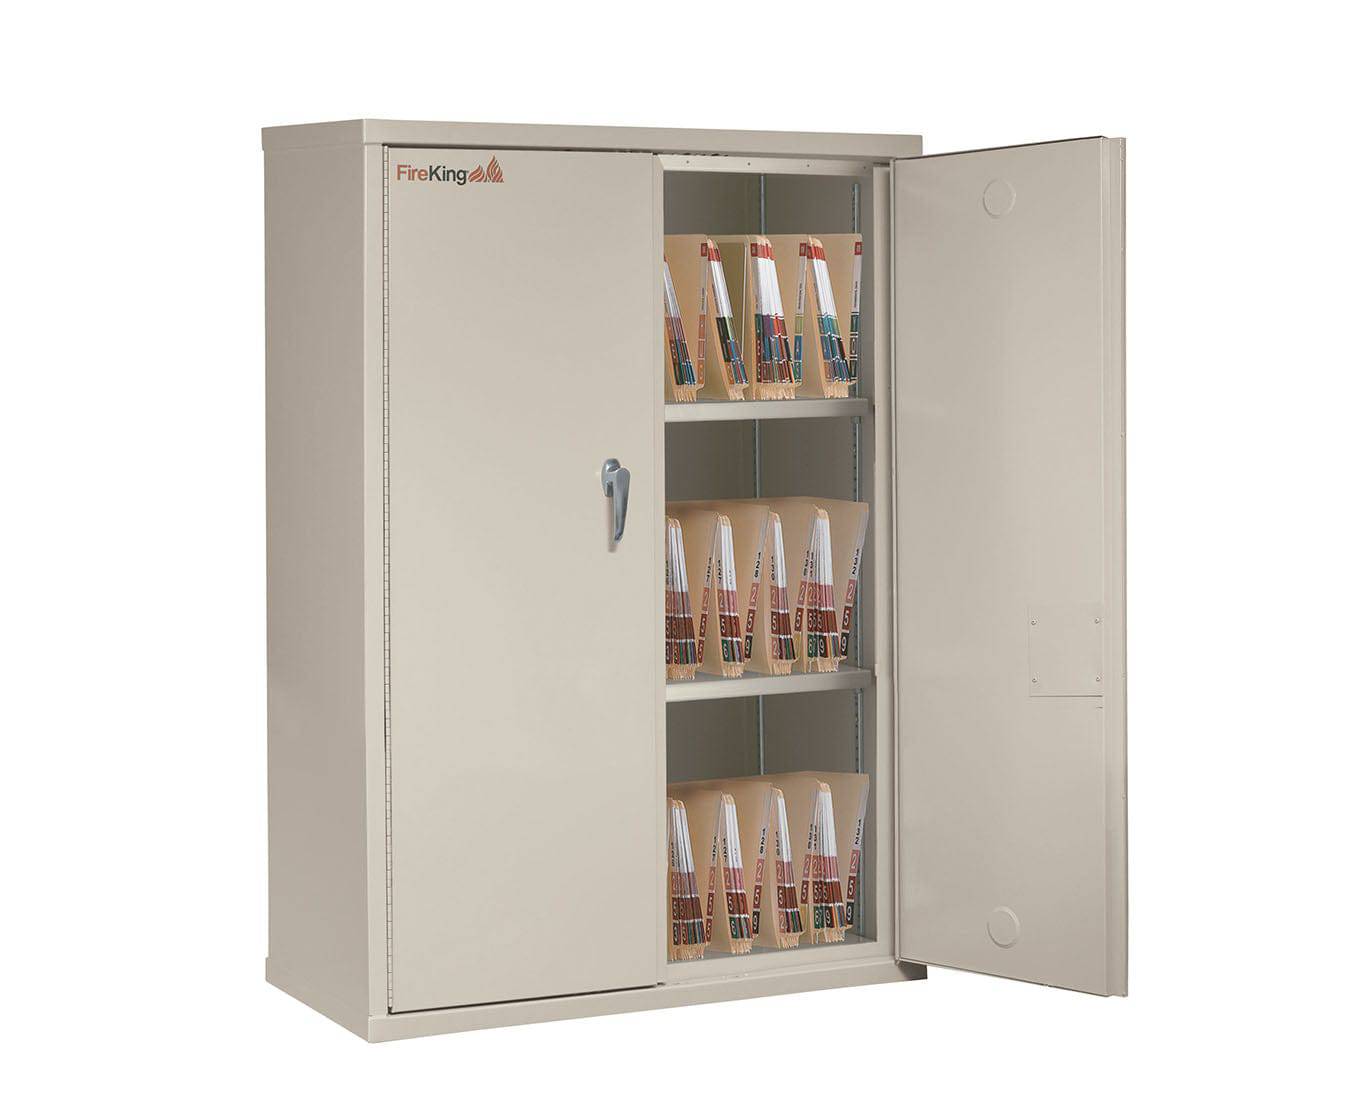 FireKing Secure Storage Cabinet with End Tab Filing CF4436-MD FireKing Letter Size with End Tab Filing CF4436 - 44" Height -MDPA  - USASafeAndVault